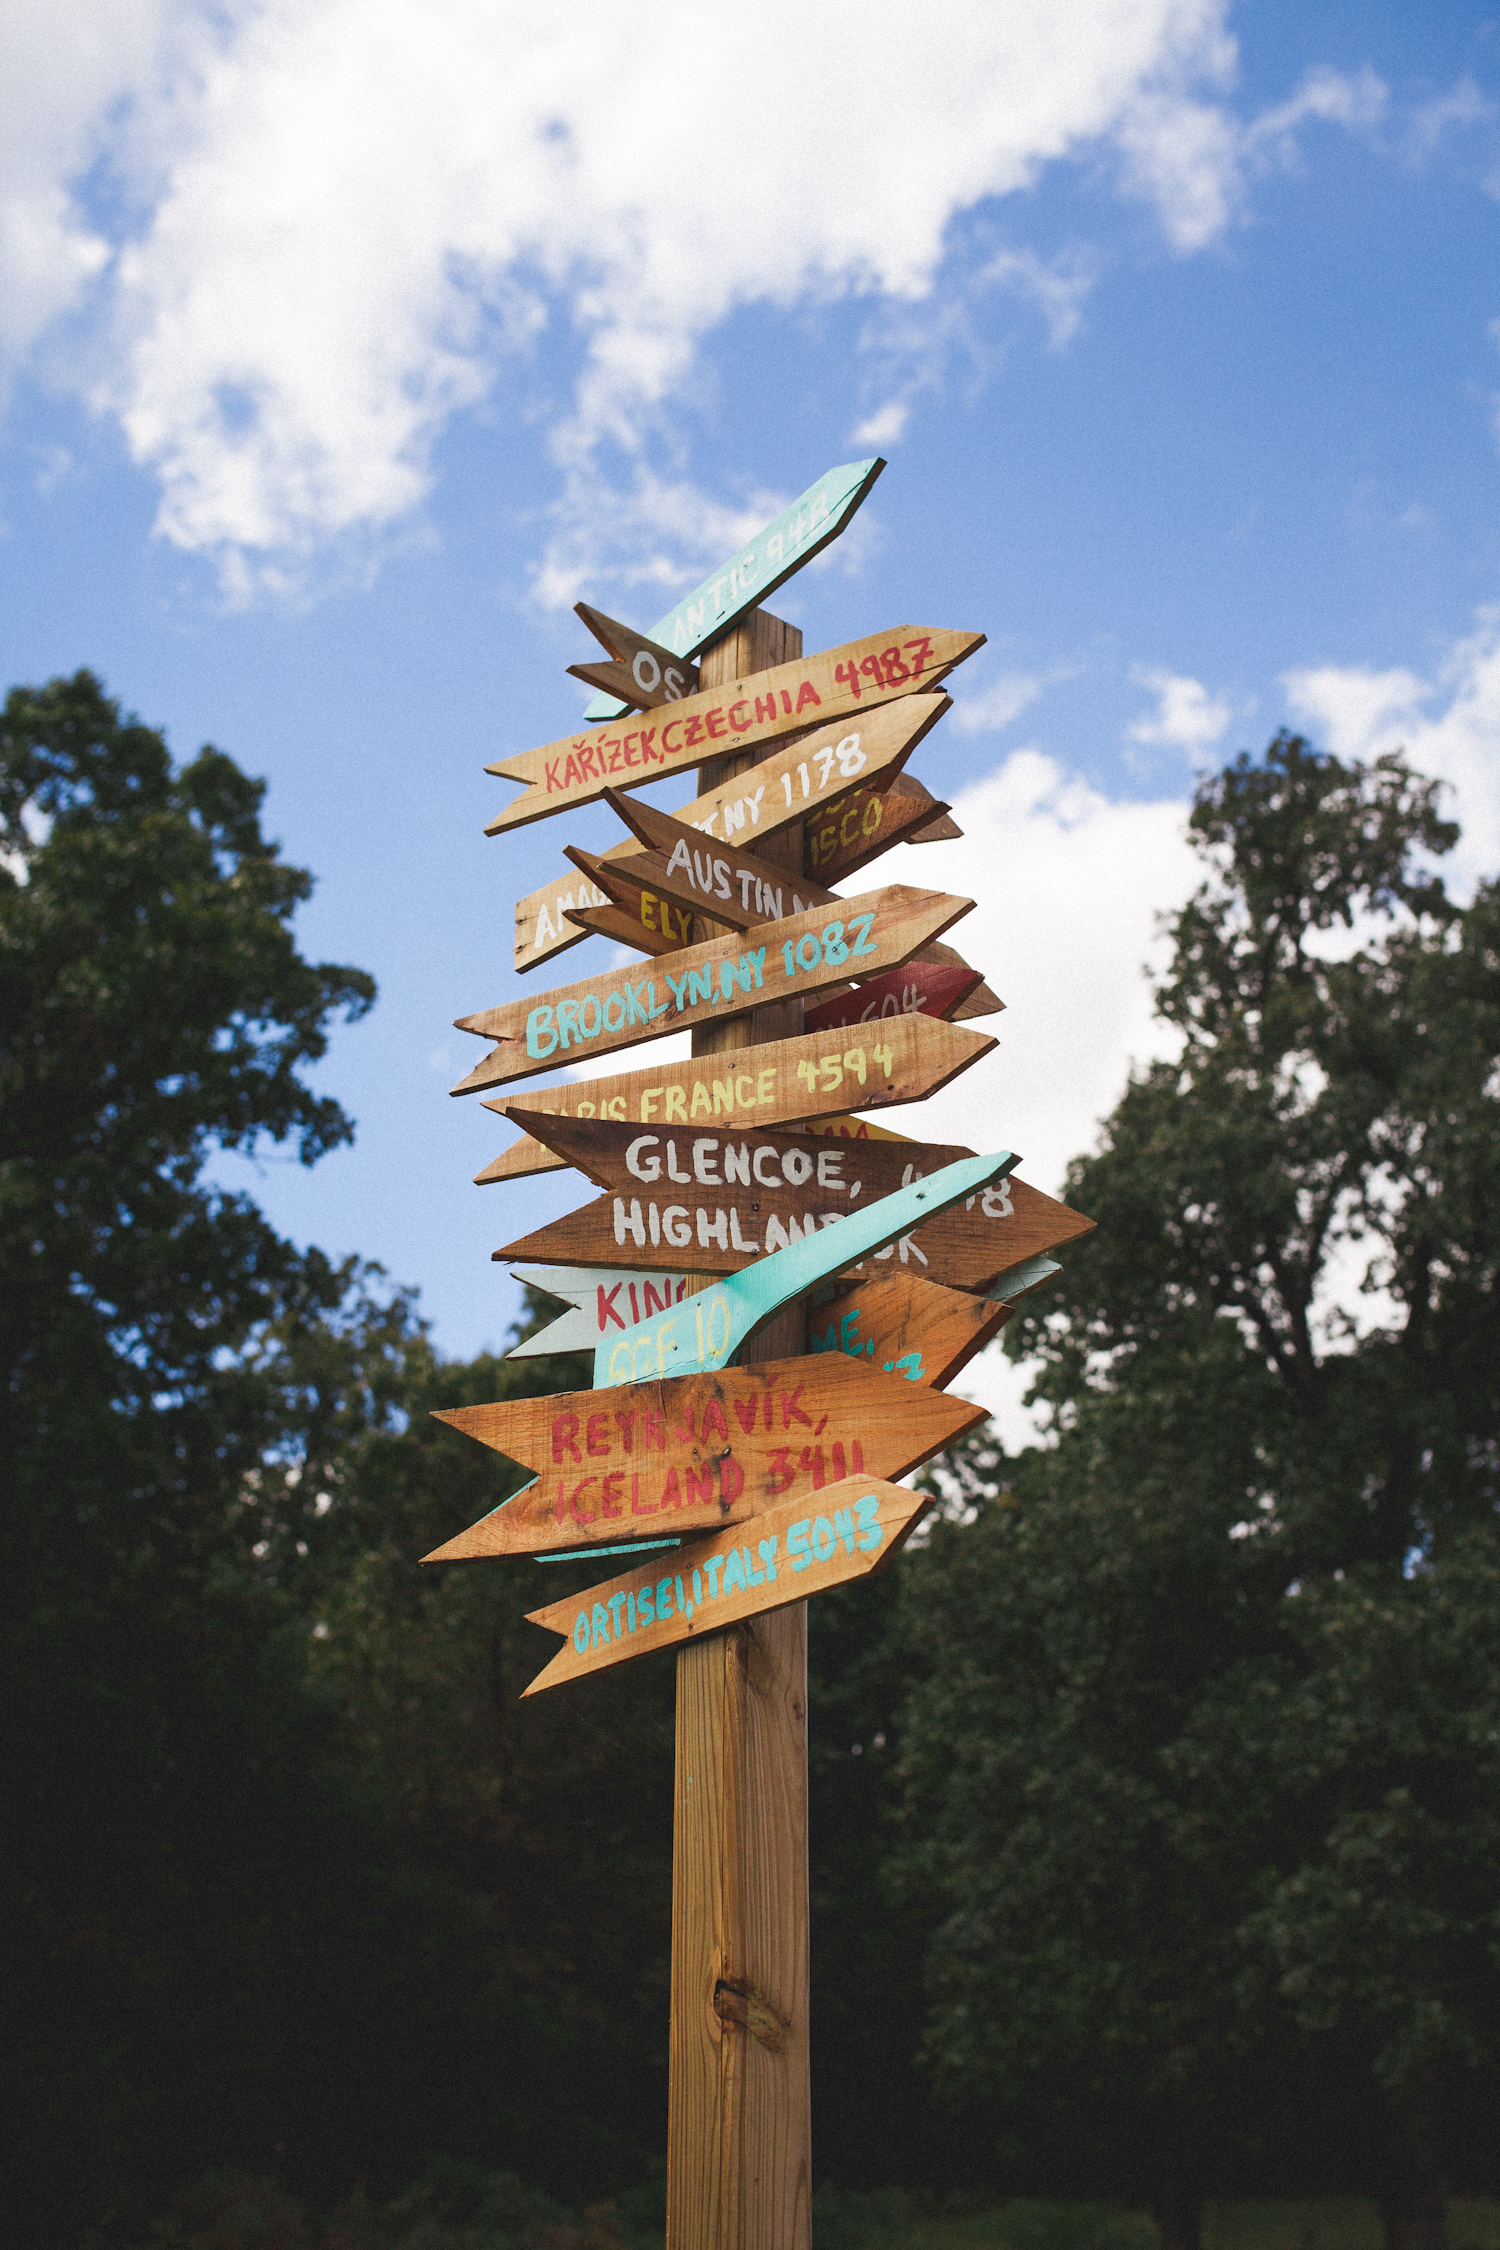 Photo of a signpost with multiple arrows pointing in various directions to different destinations, with the destination name and distance hand-painted on each.